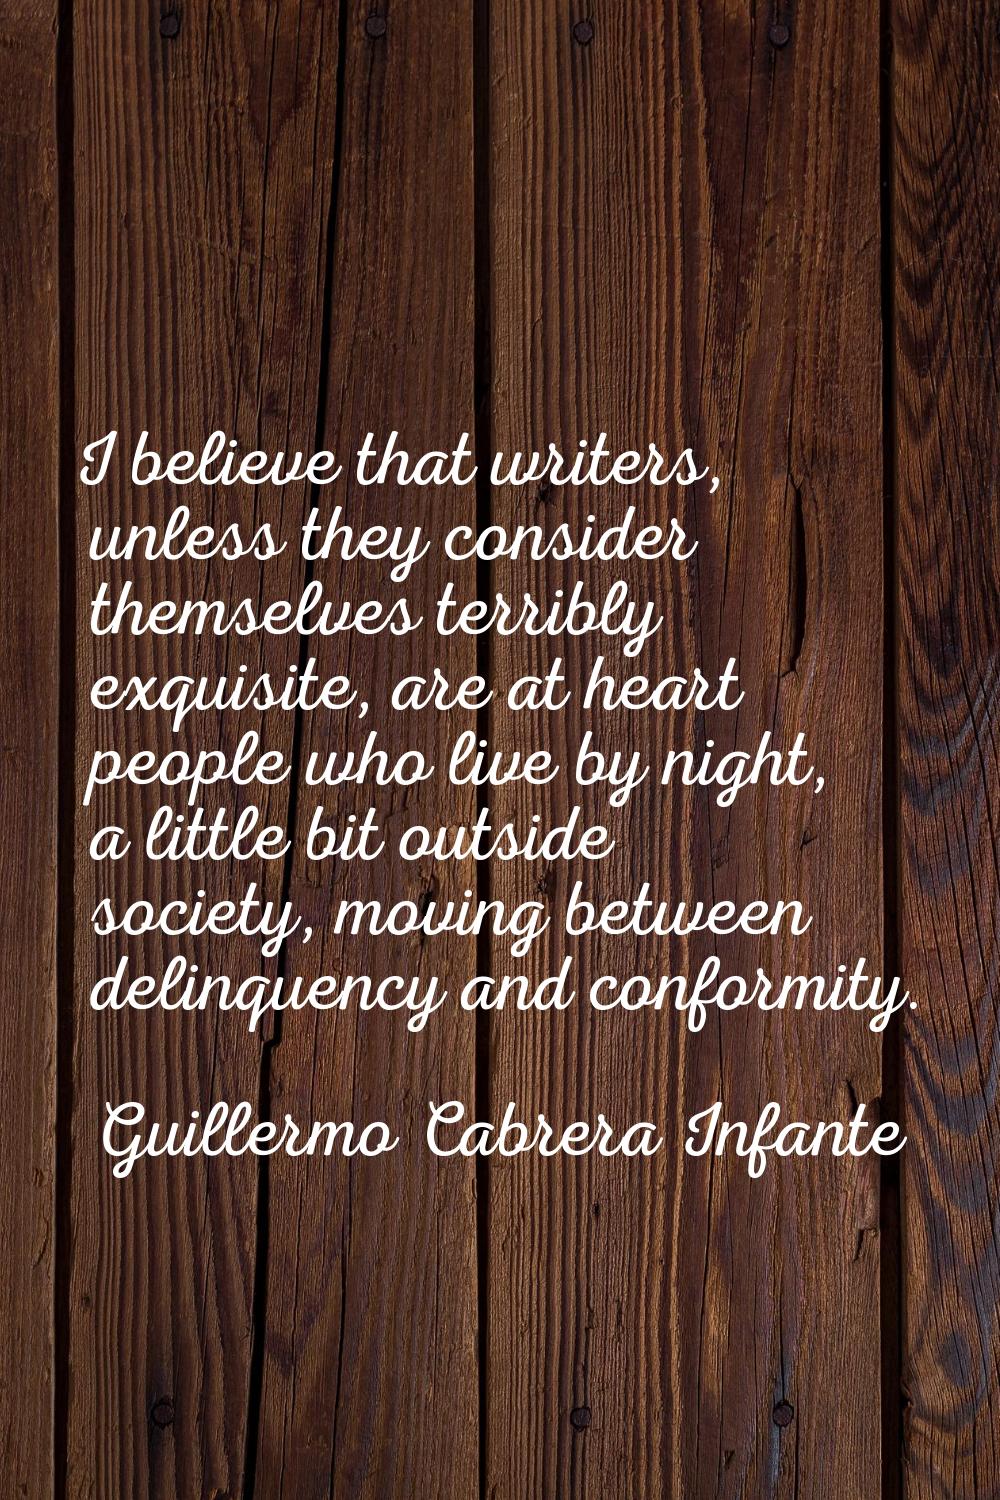 I believe that writers, unless they consider themselves terribly exquisite, are at heart people who